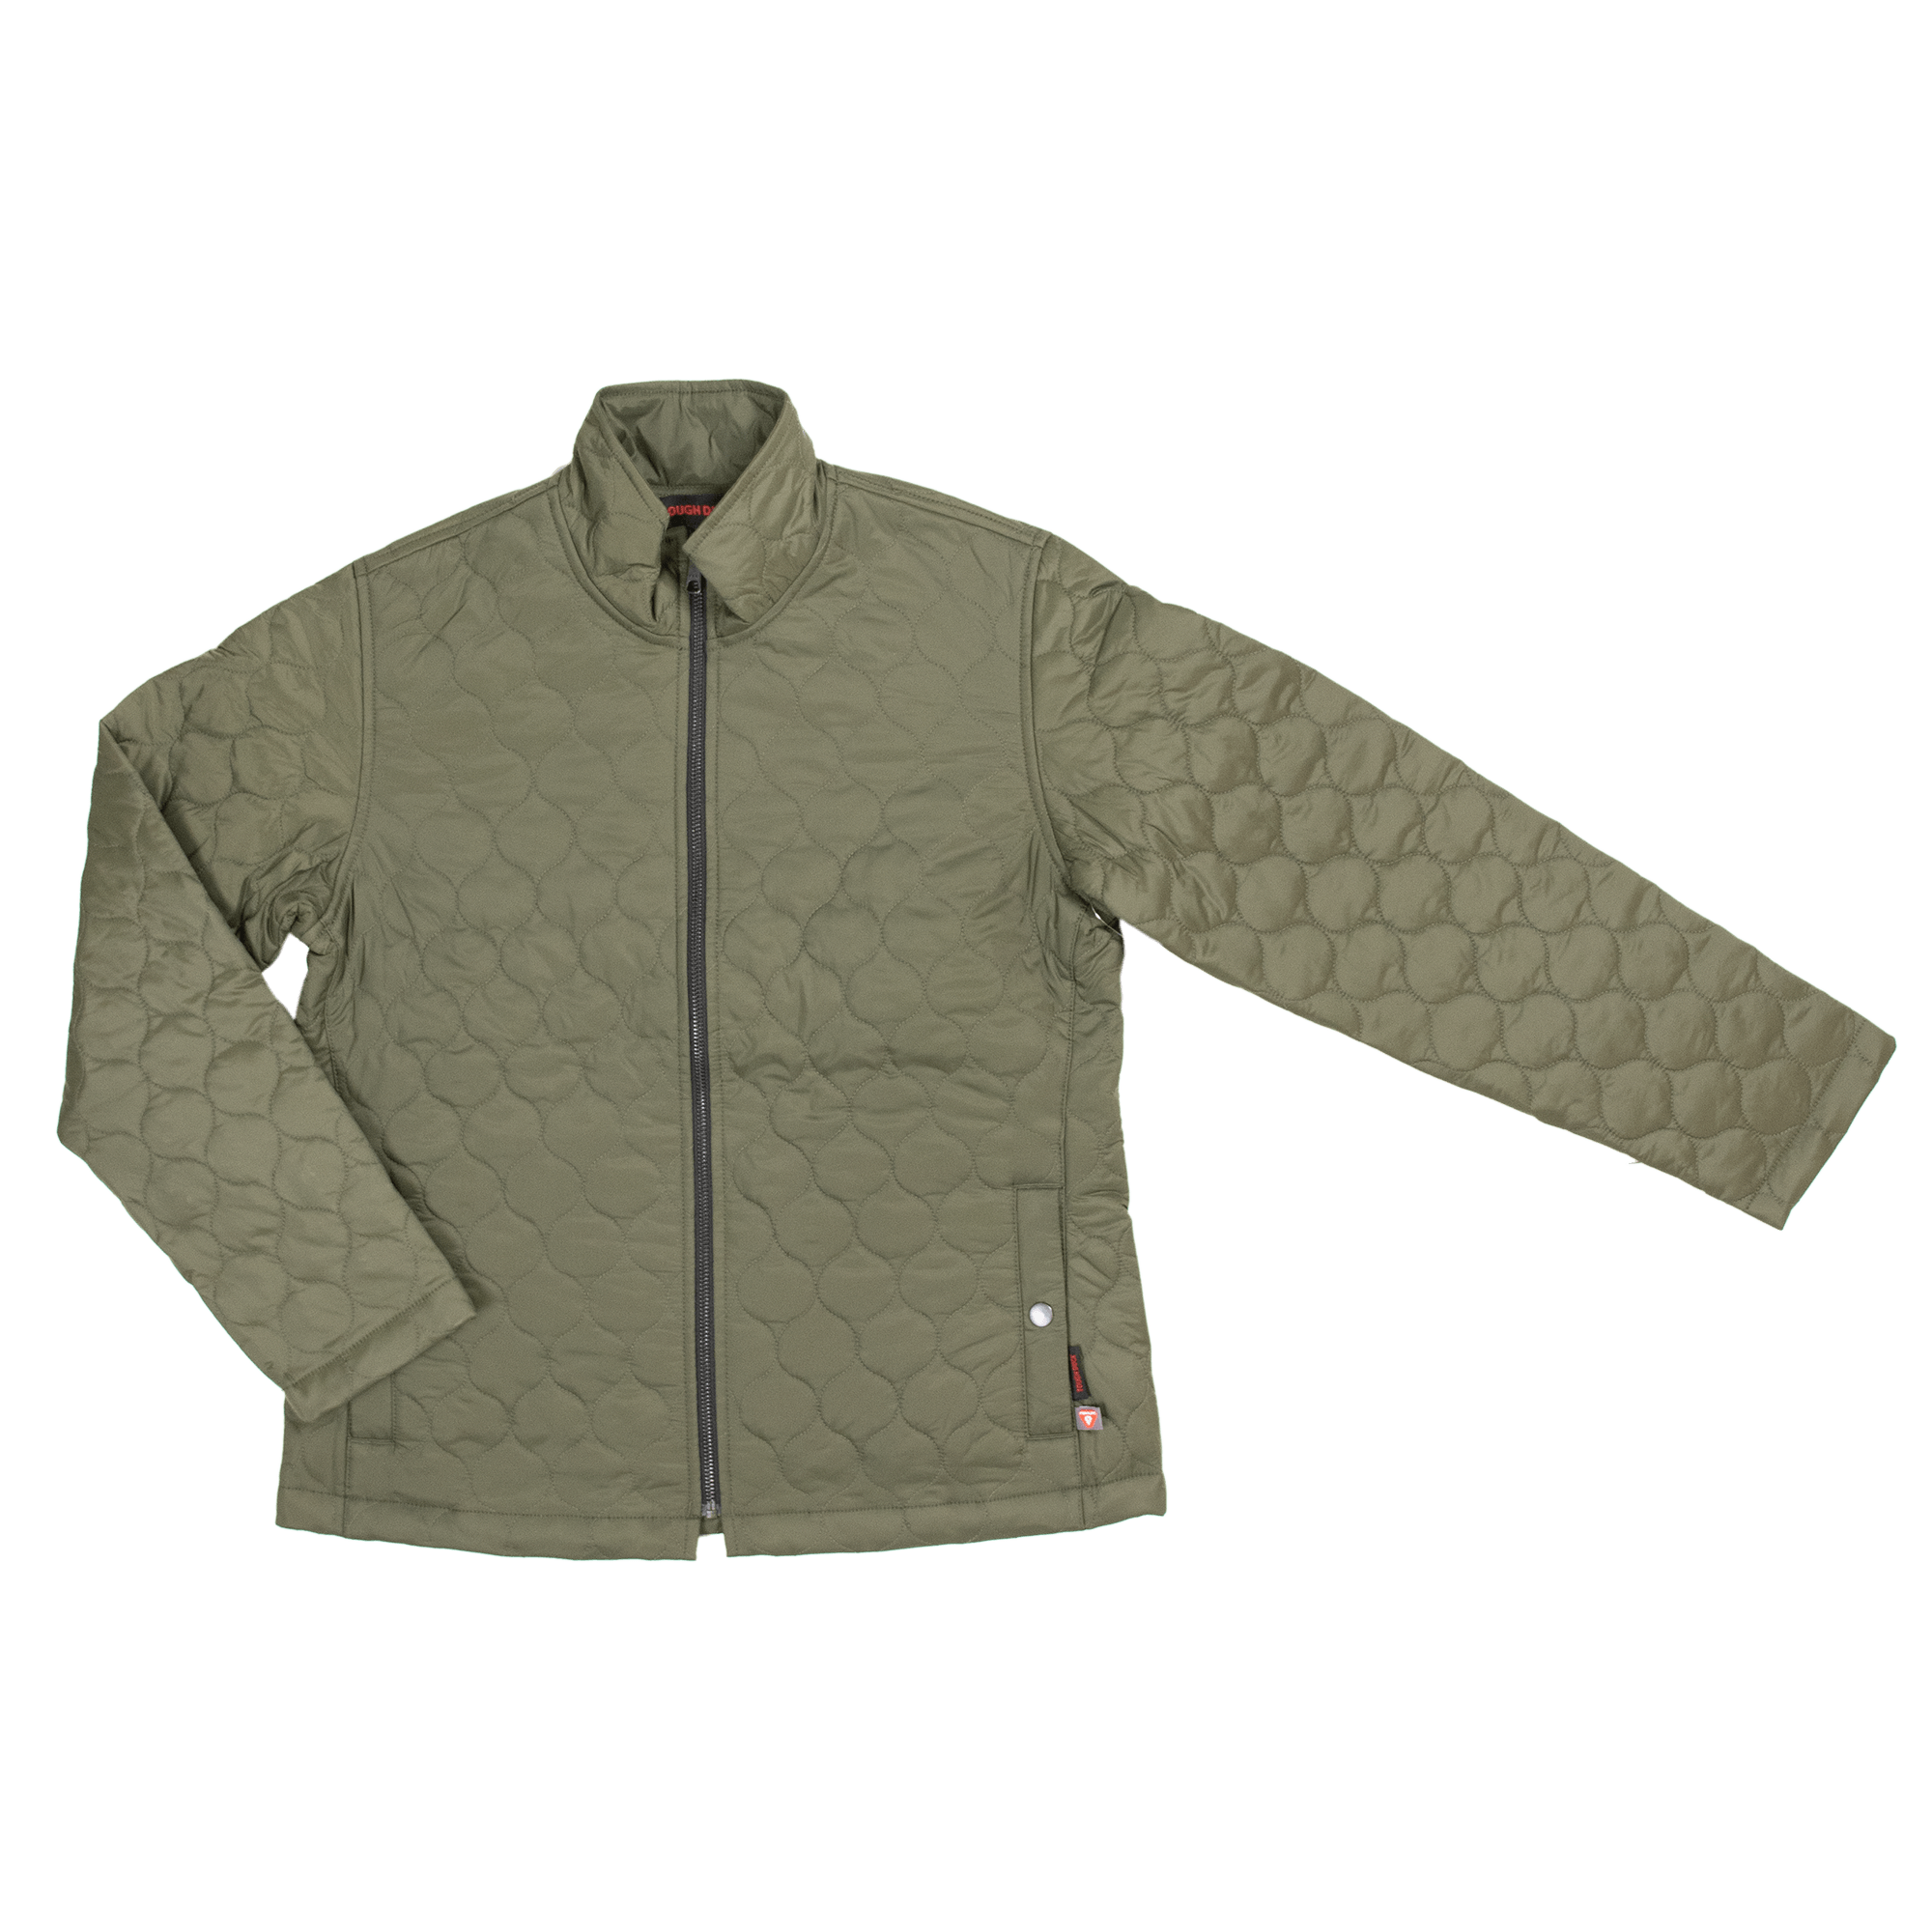 https://0901.nccdn.net/4_2/000/000/046/6ea/wj29-olive-f-tough-duck-womens-quilted-jacket-olive-front.png